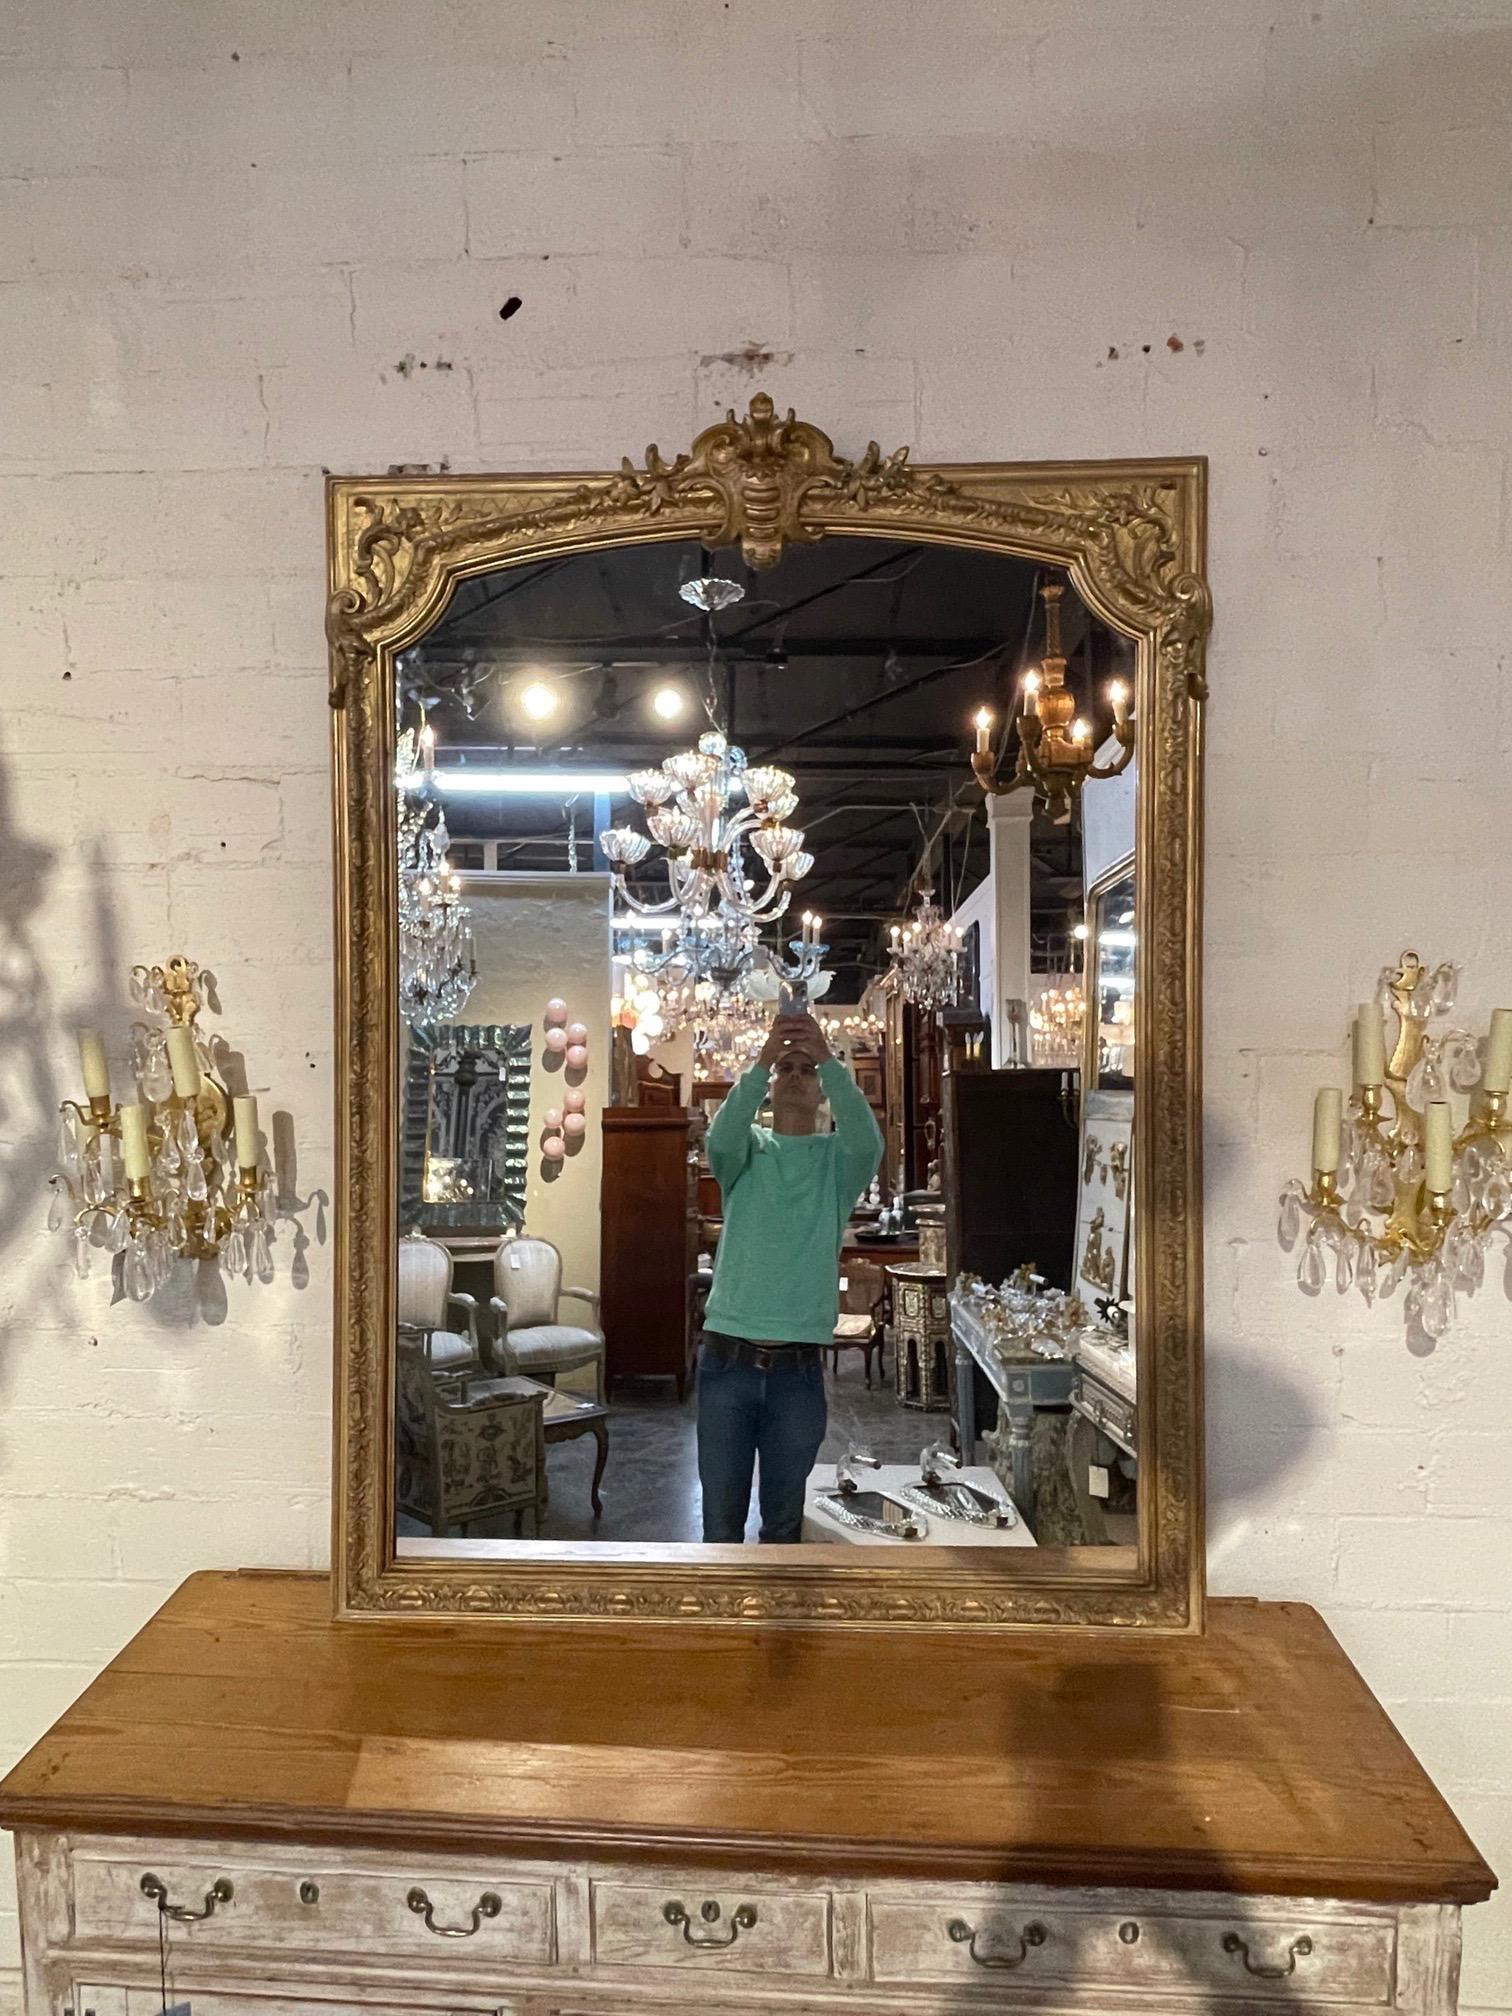 Very fine 19th century large French Louis XVI style carved and giltwood mirror. Nice crest and pretty carving on this piece. Adds a real touch of elegance!